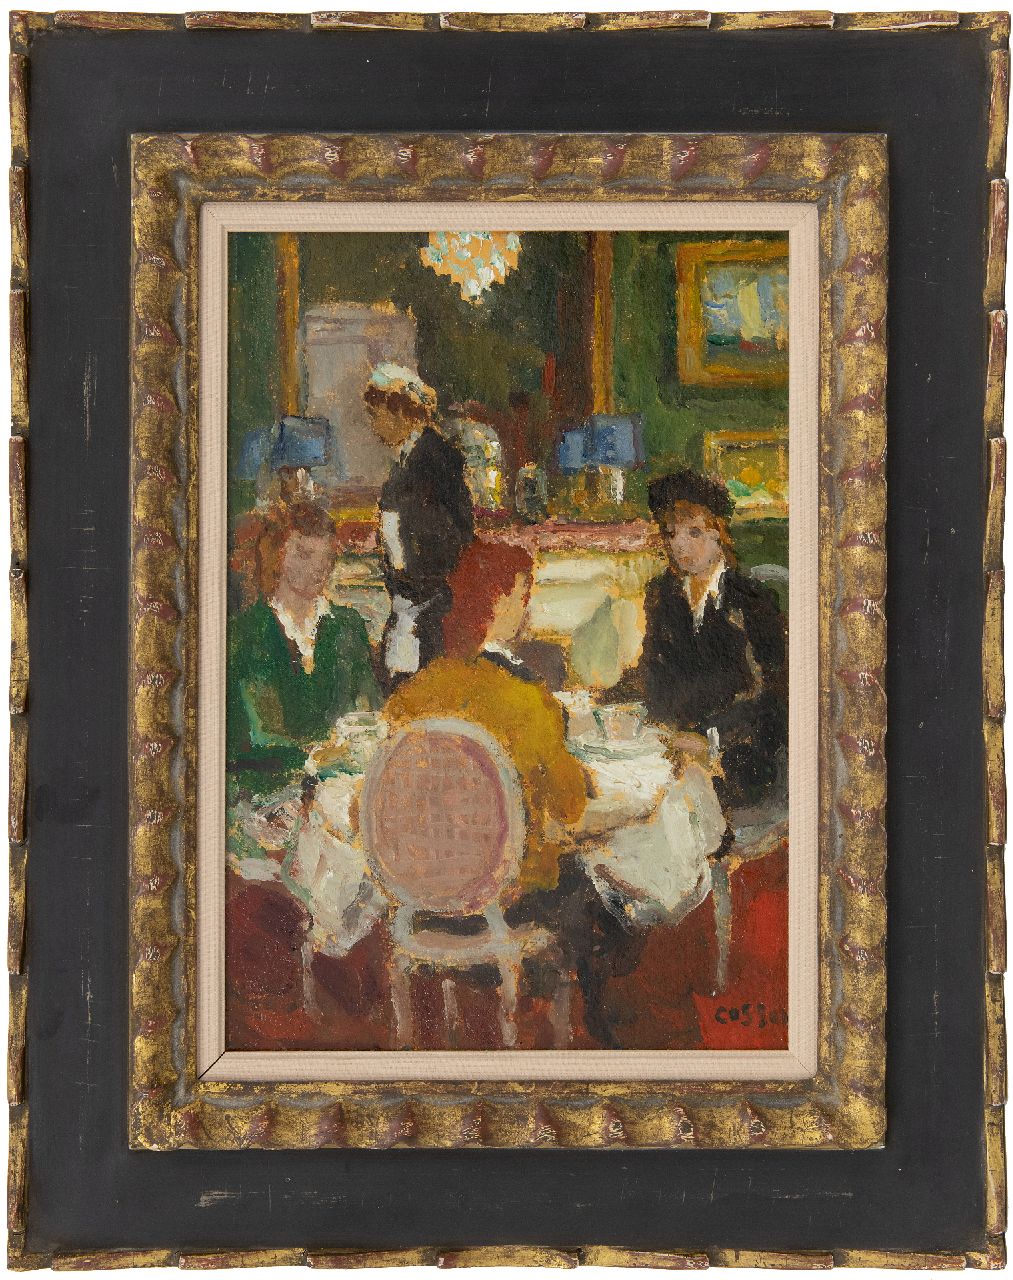 Cosson J.L.M.  | Jean Louis 'Marcel' Cosson | Paintings offered for sale | In the restaurant, oil on painter's board 34.8 x 24.1 cm, signed l.r.